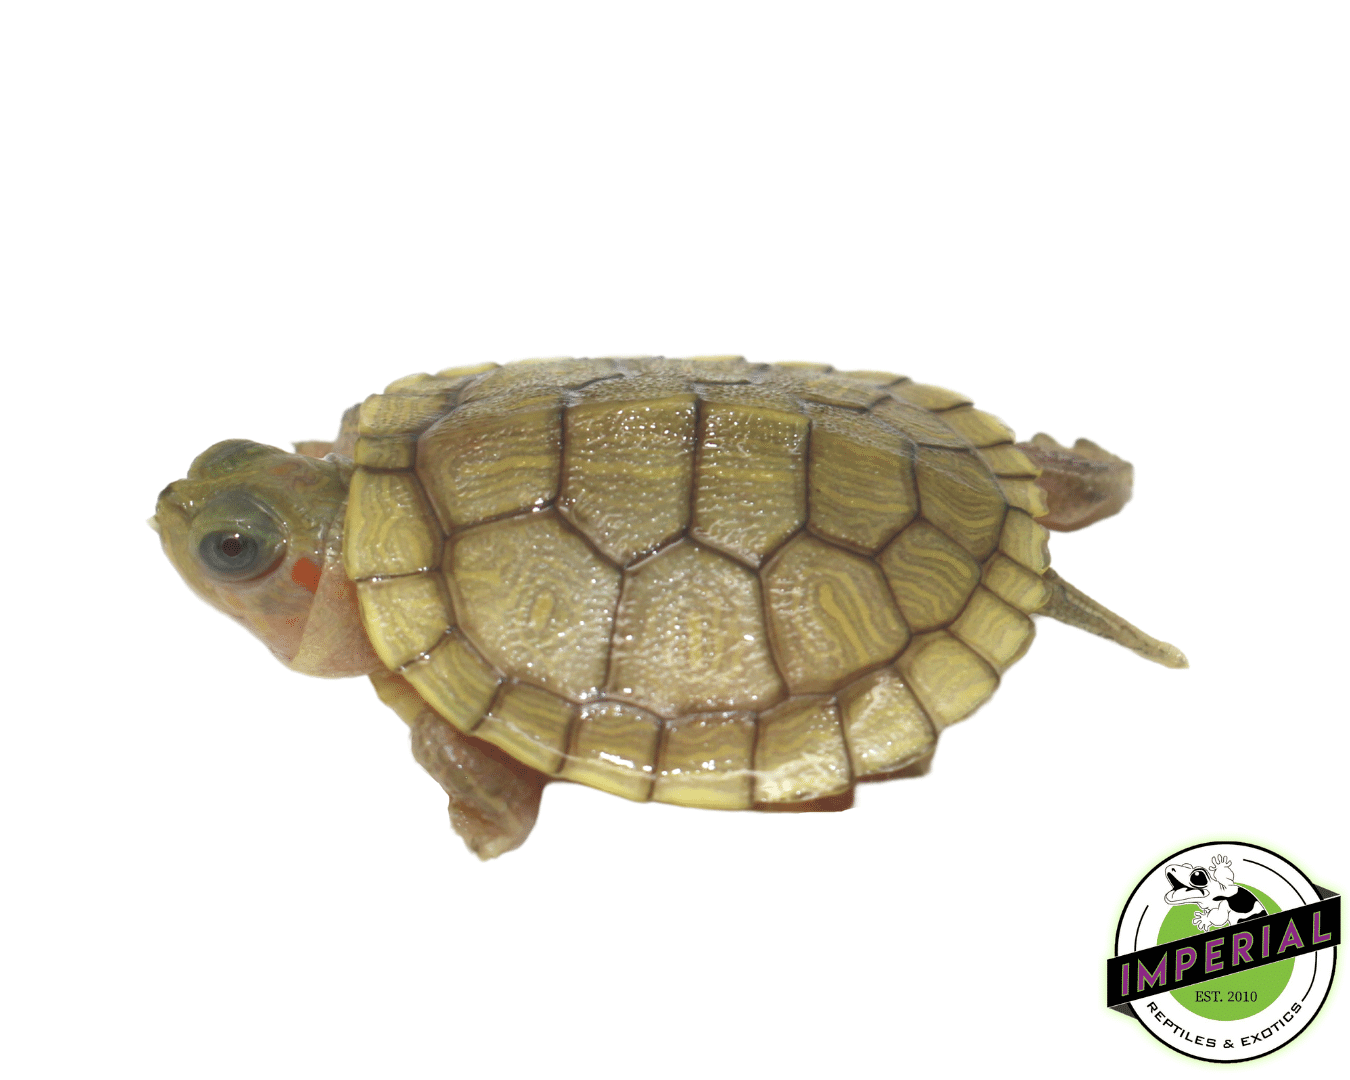 hybino red ear slider turtle for sale, buy turtles online at cheap prices